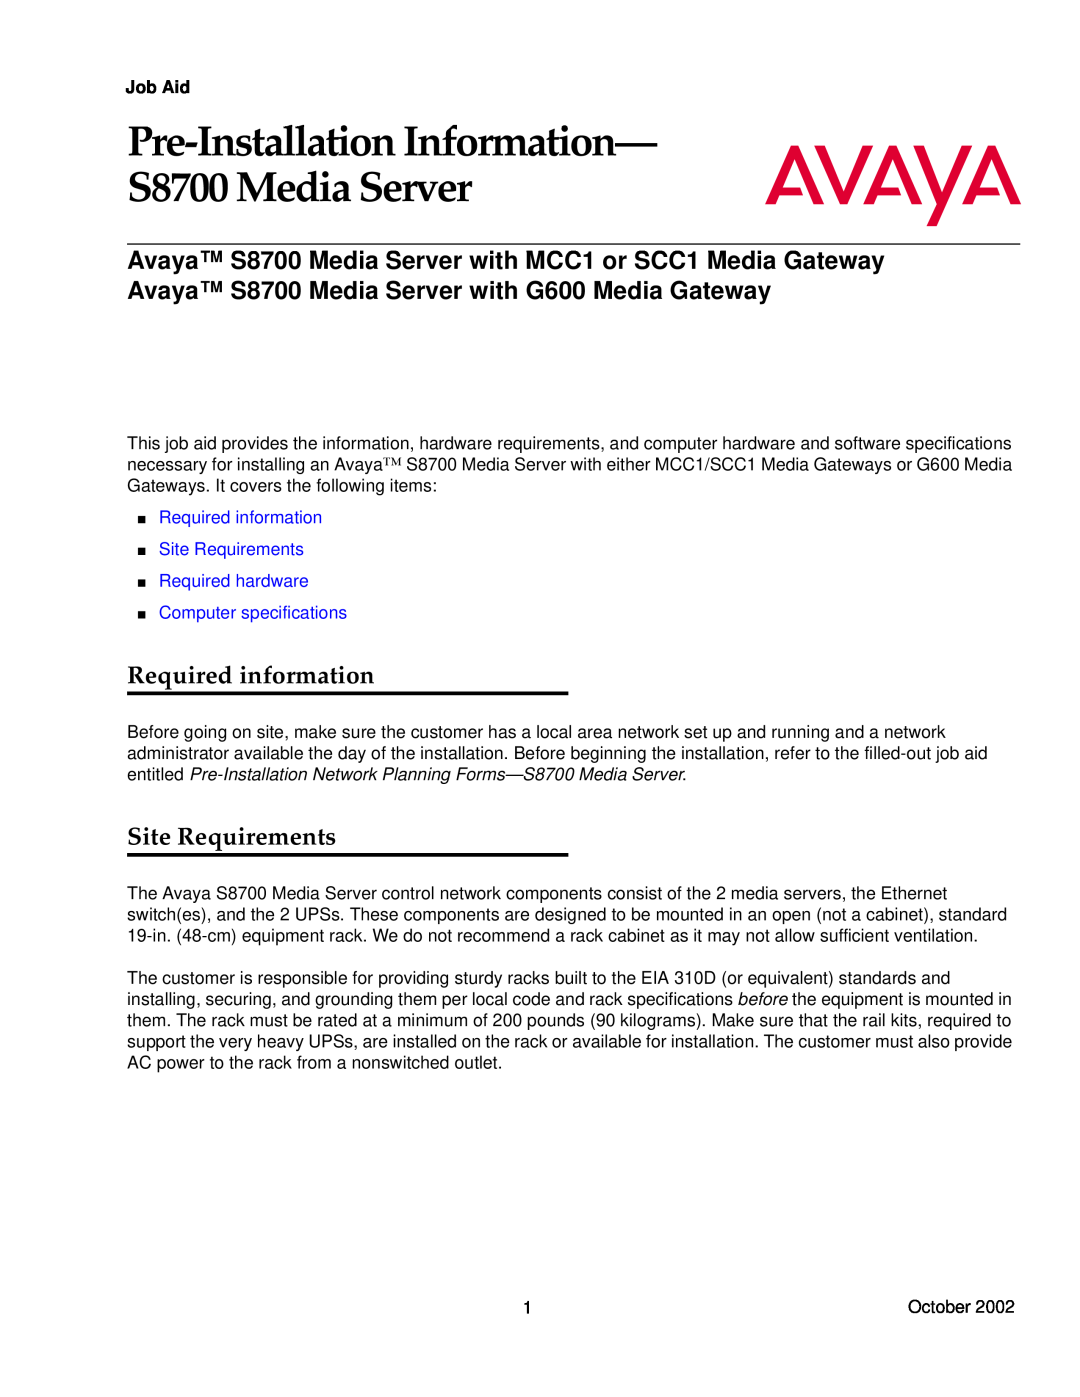 Avaya S8700 specifications Required information, Site Requirements, Job Aid, Computer specifications 